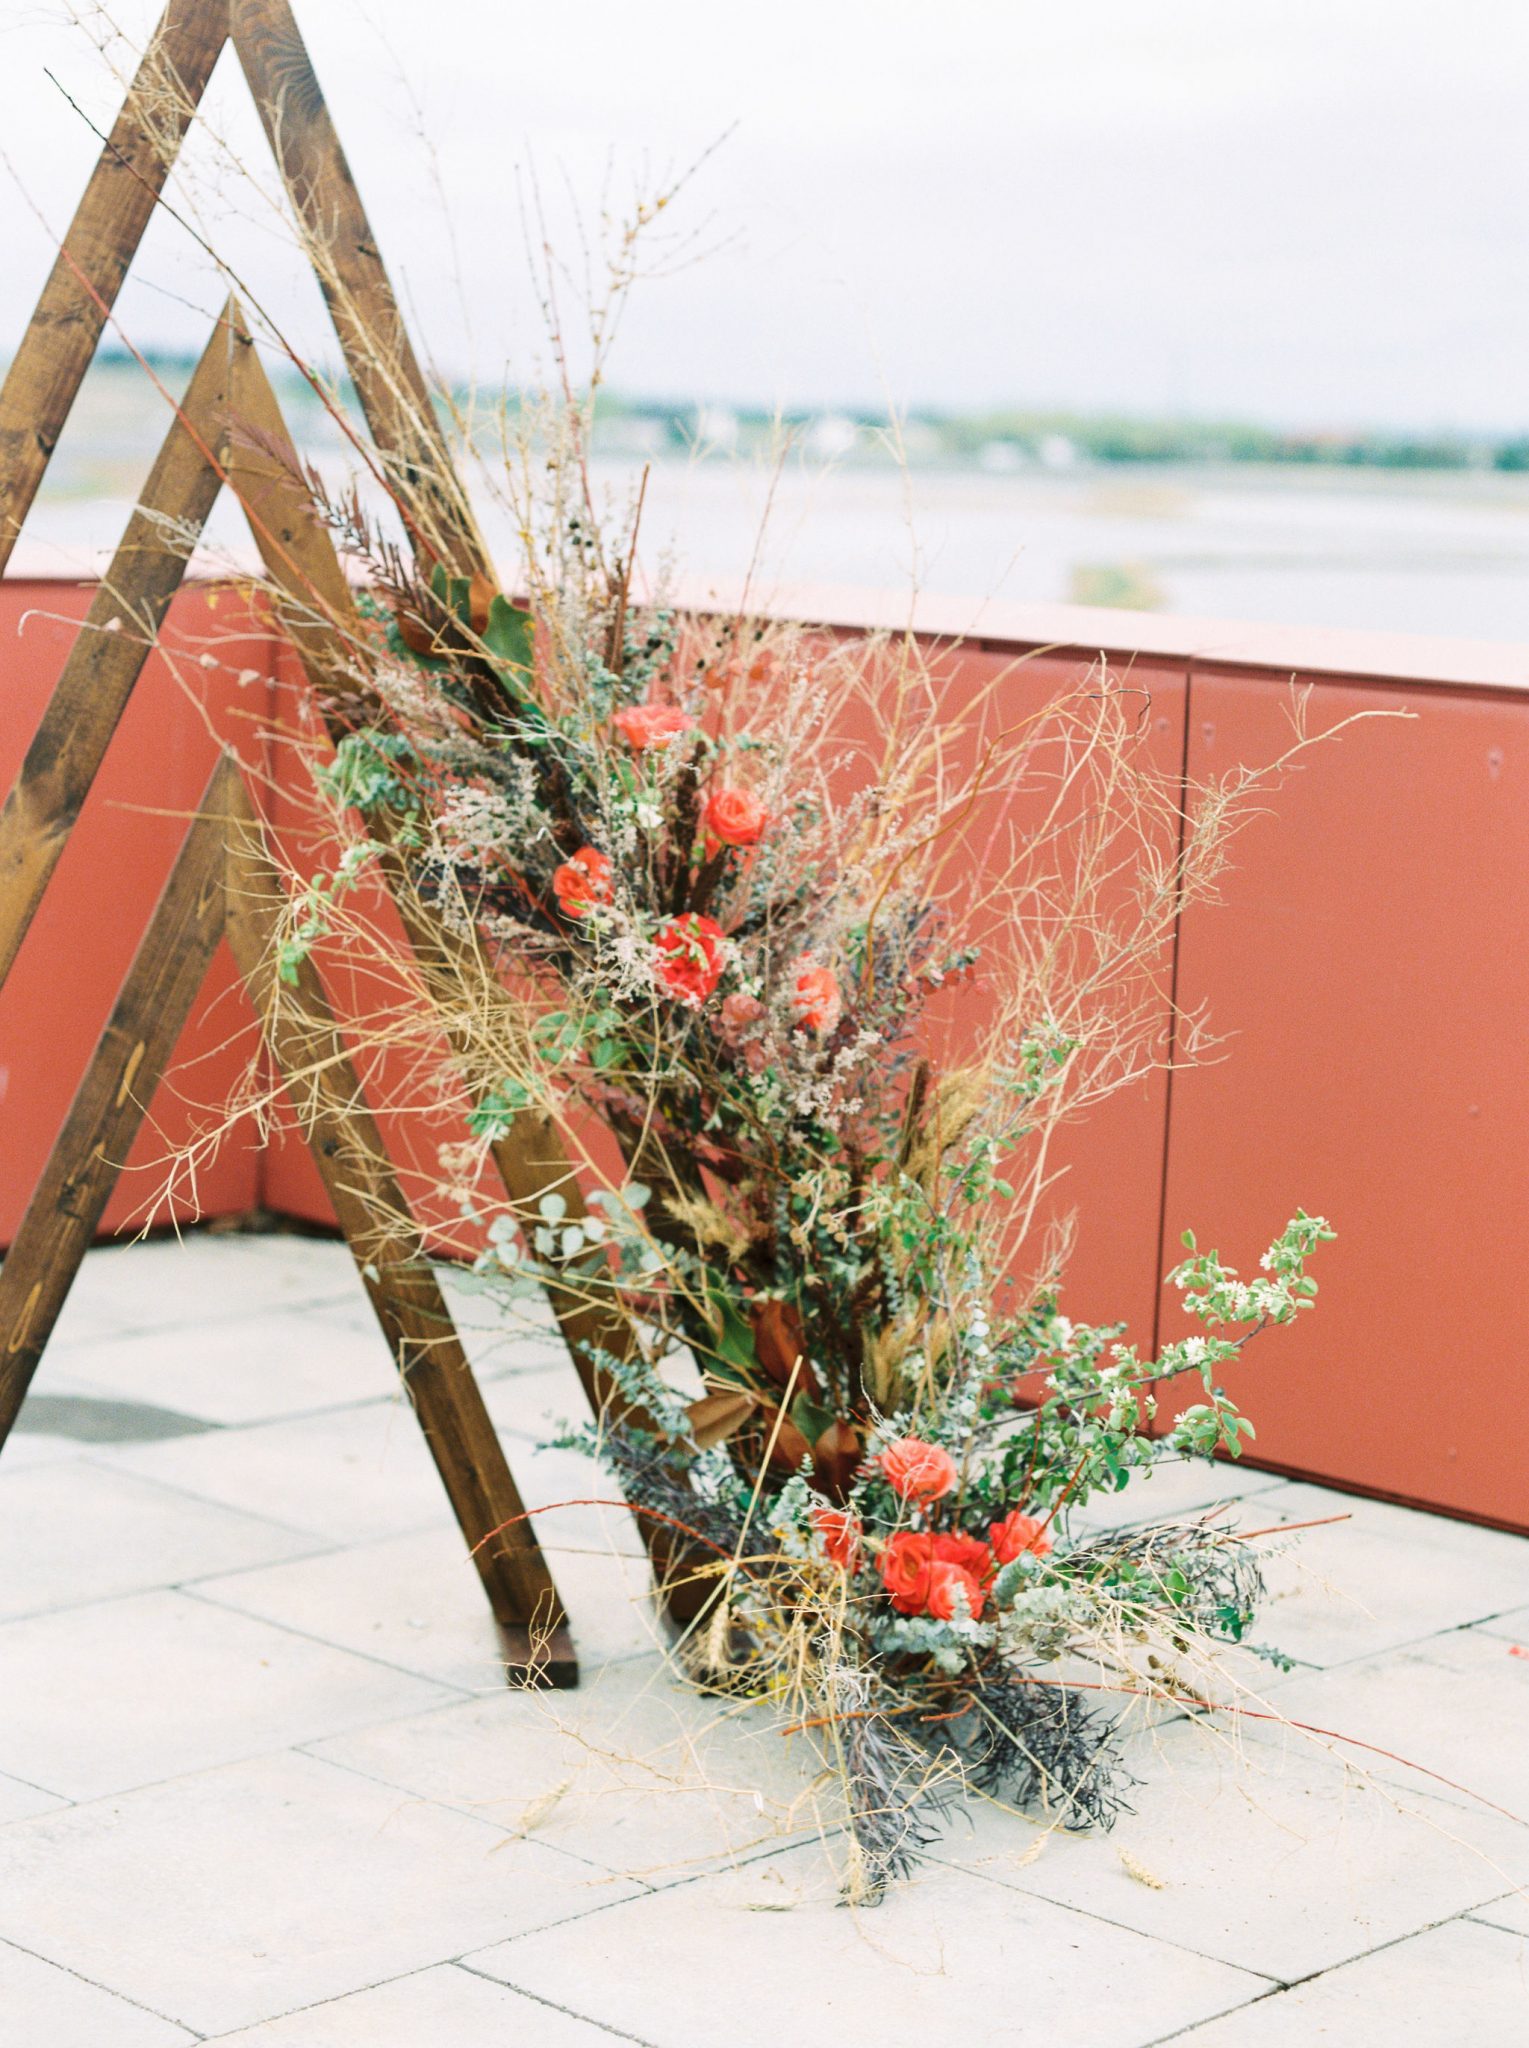 Wooden triangle arches and terracotta flowers as an outdoor wedding ceremony backdrop